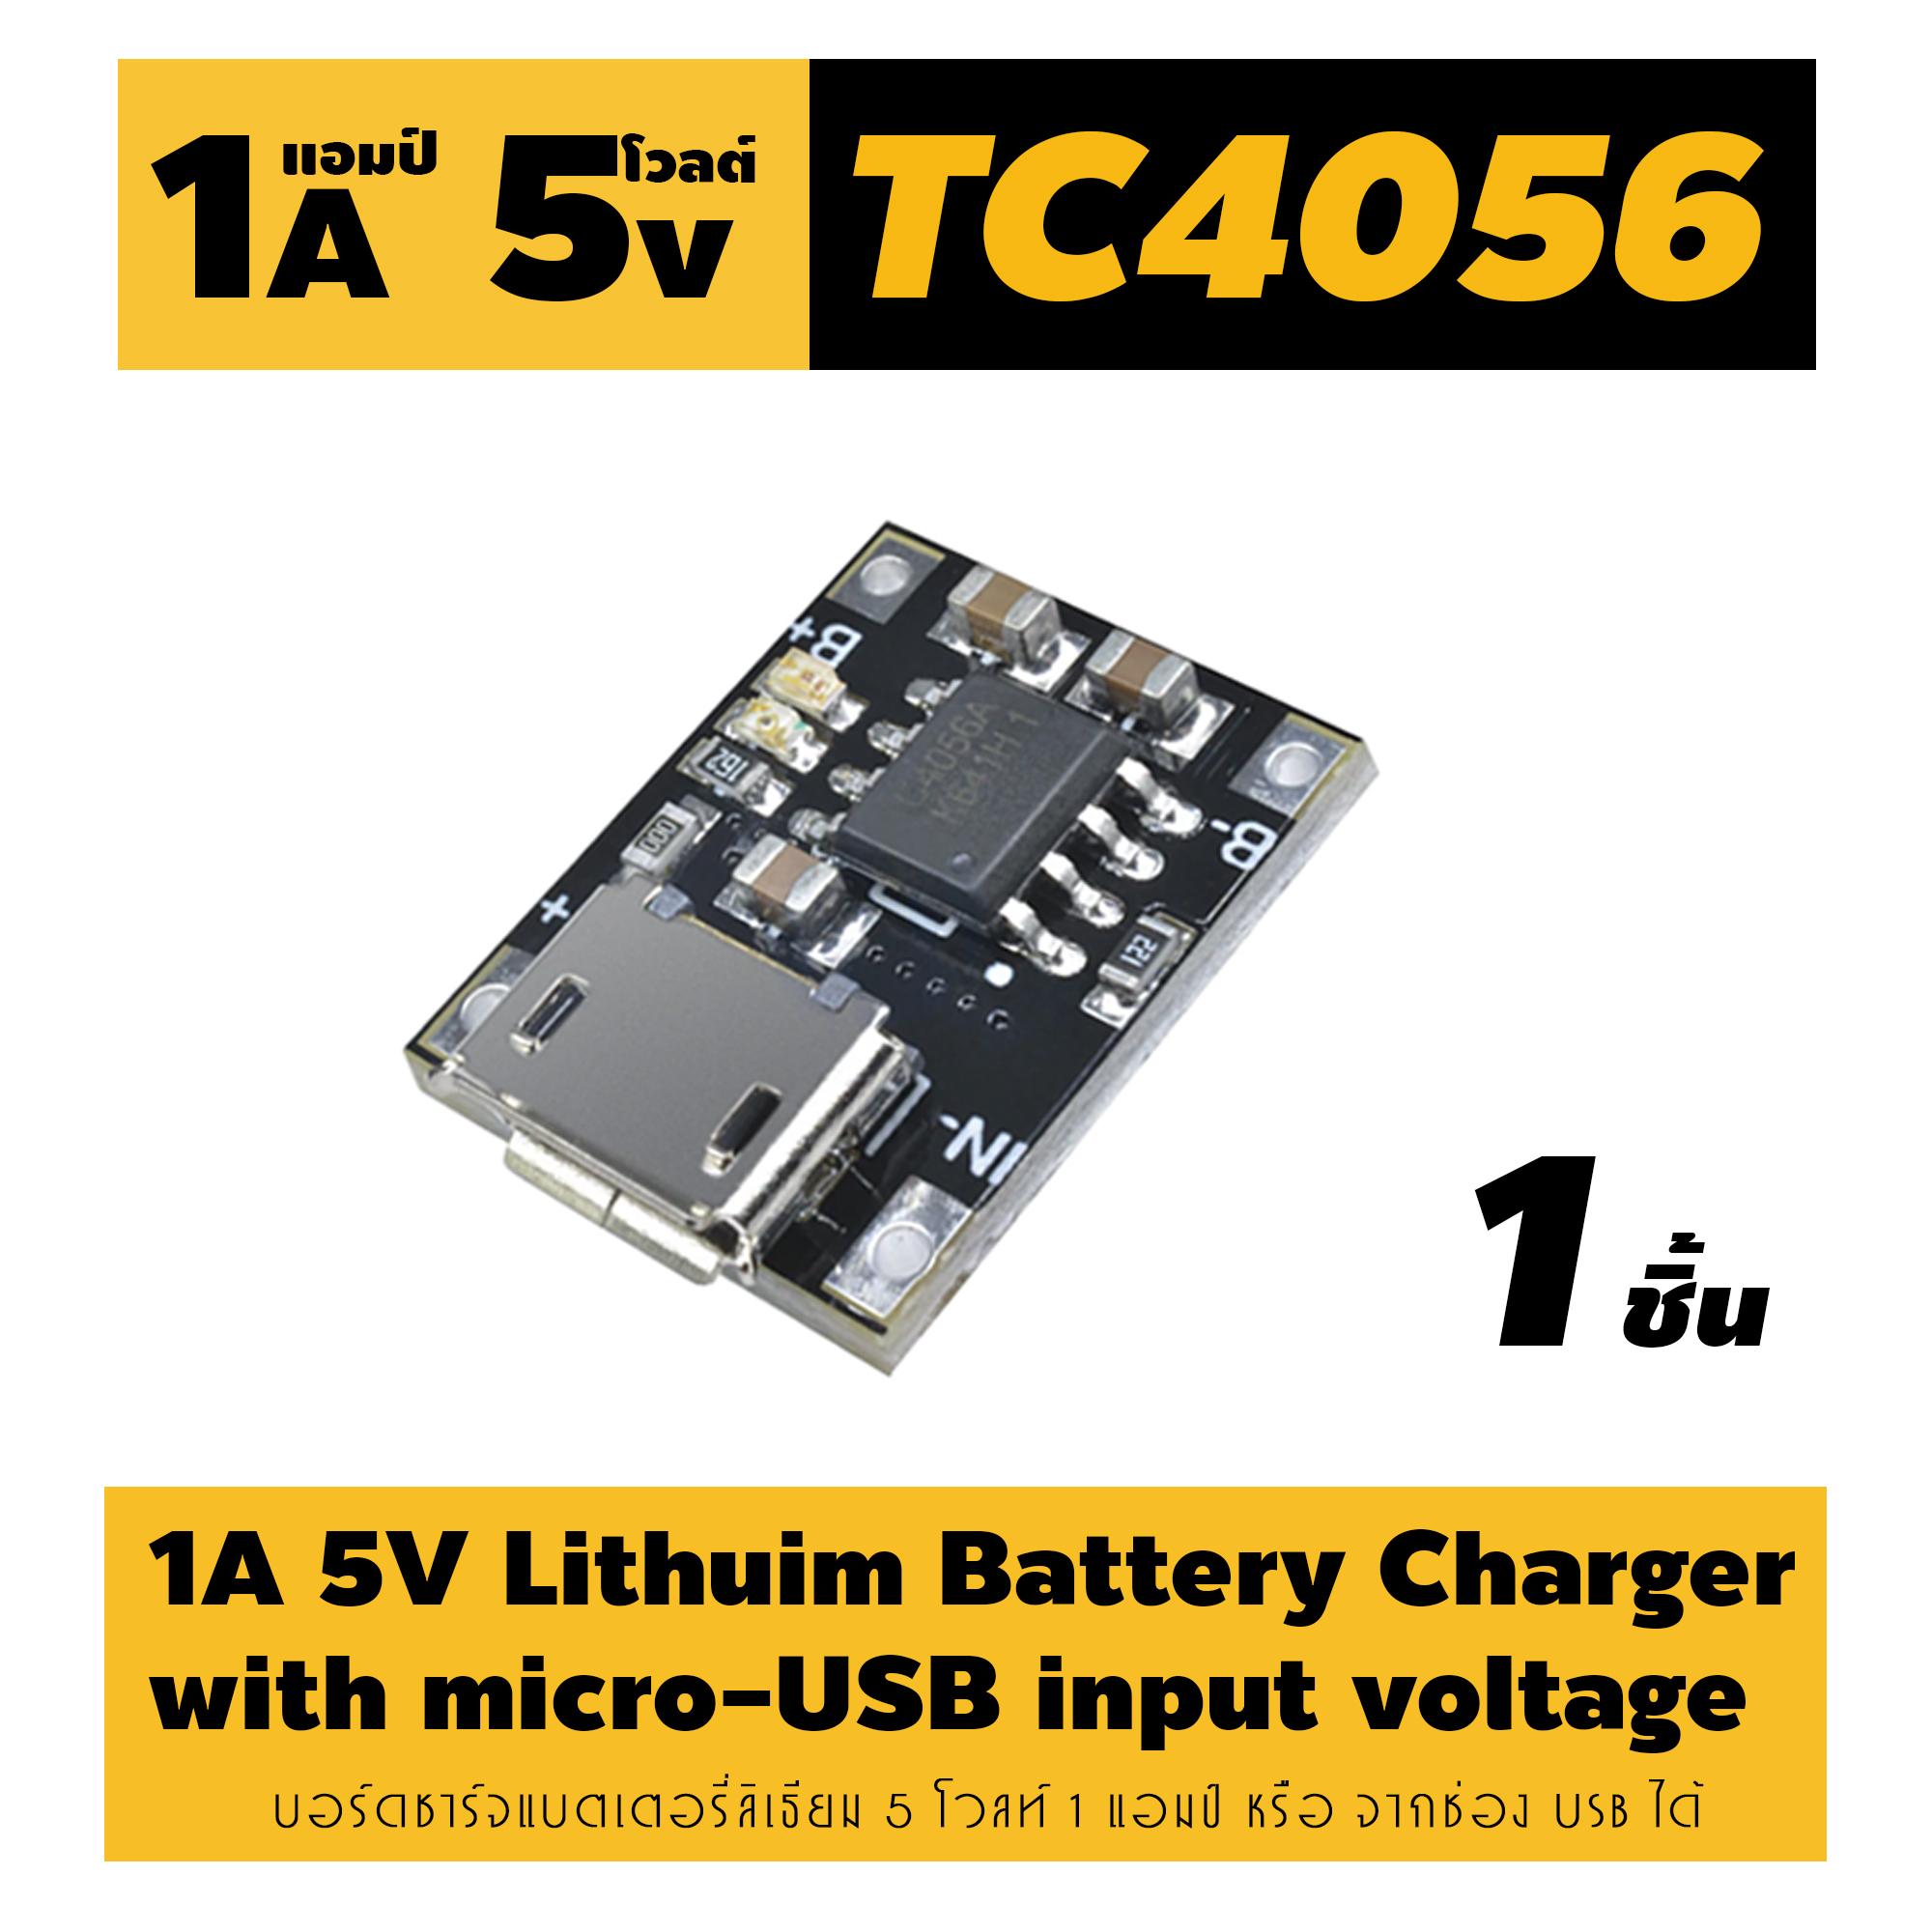 TC4056 Single Lithium Battery Charger 1A 5V with micro-USB input voltage DIY Module